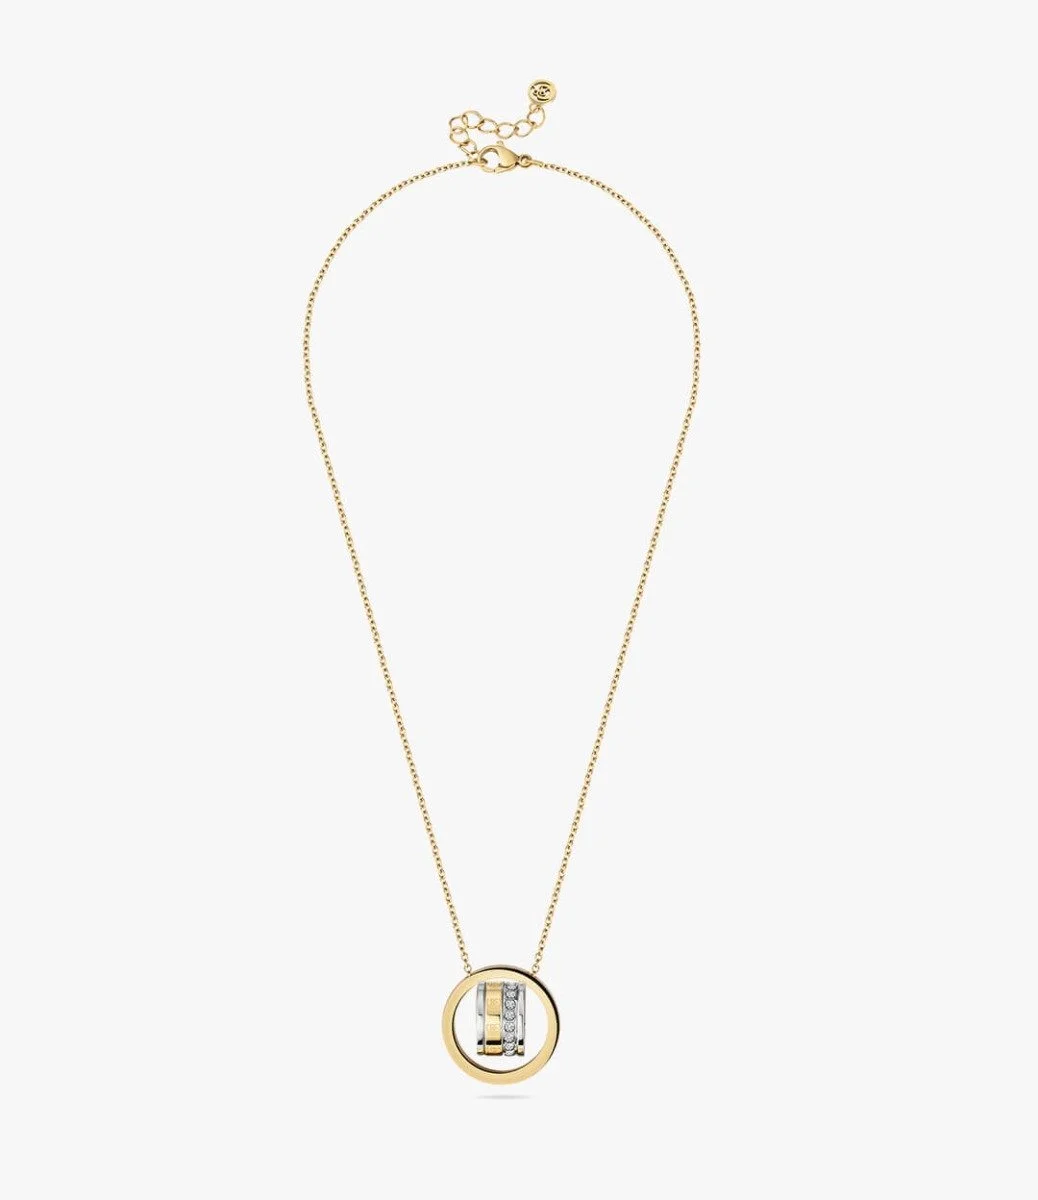 CERRUTI 1881 Silver & Rose Gold Plated Necklace